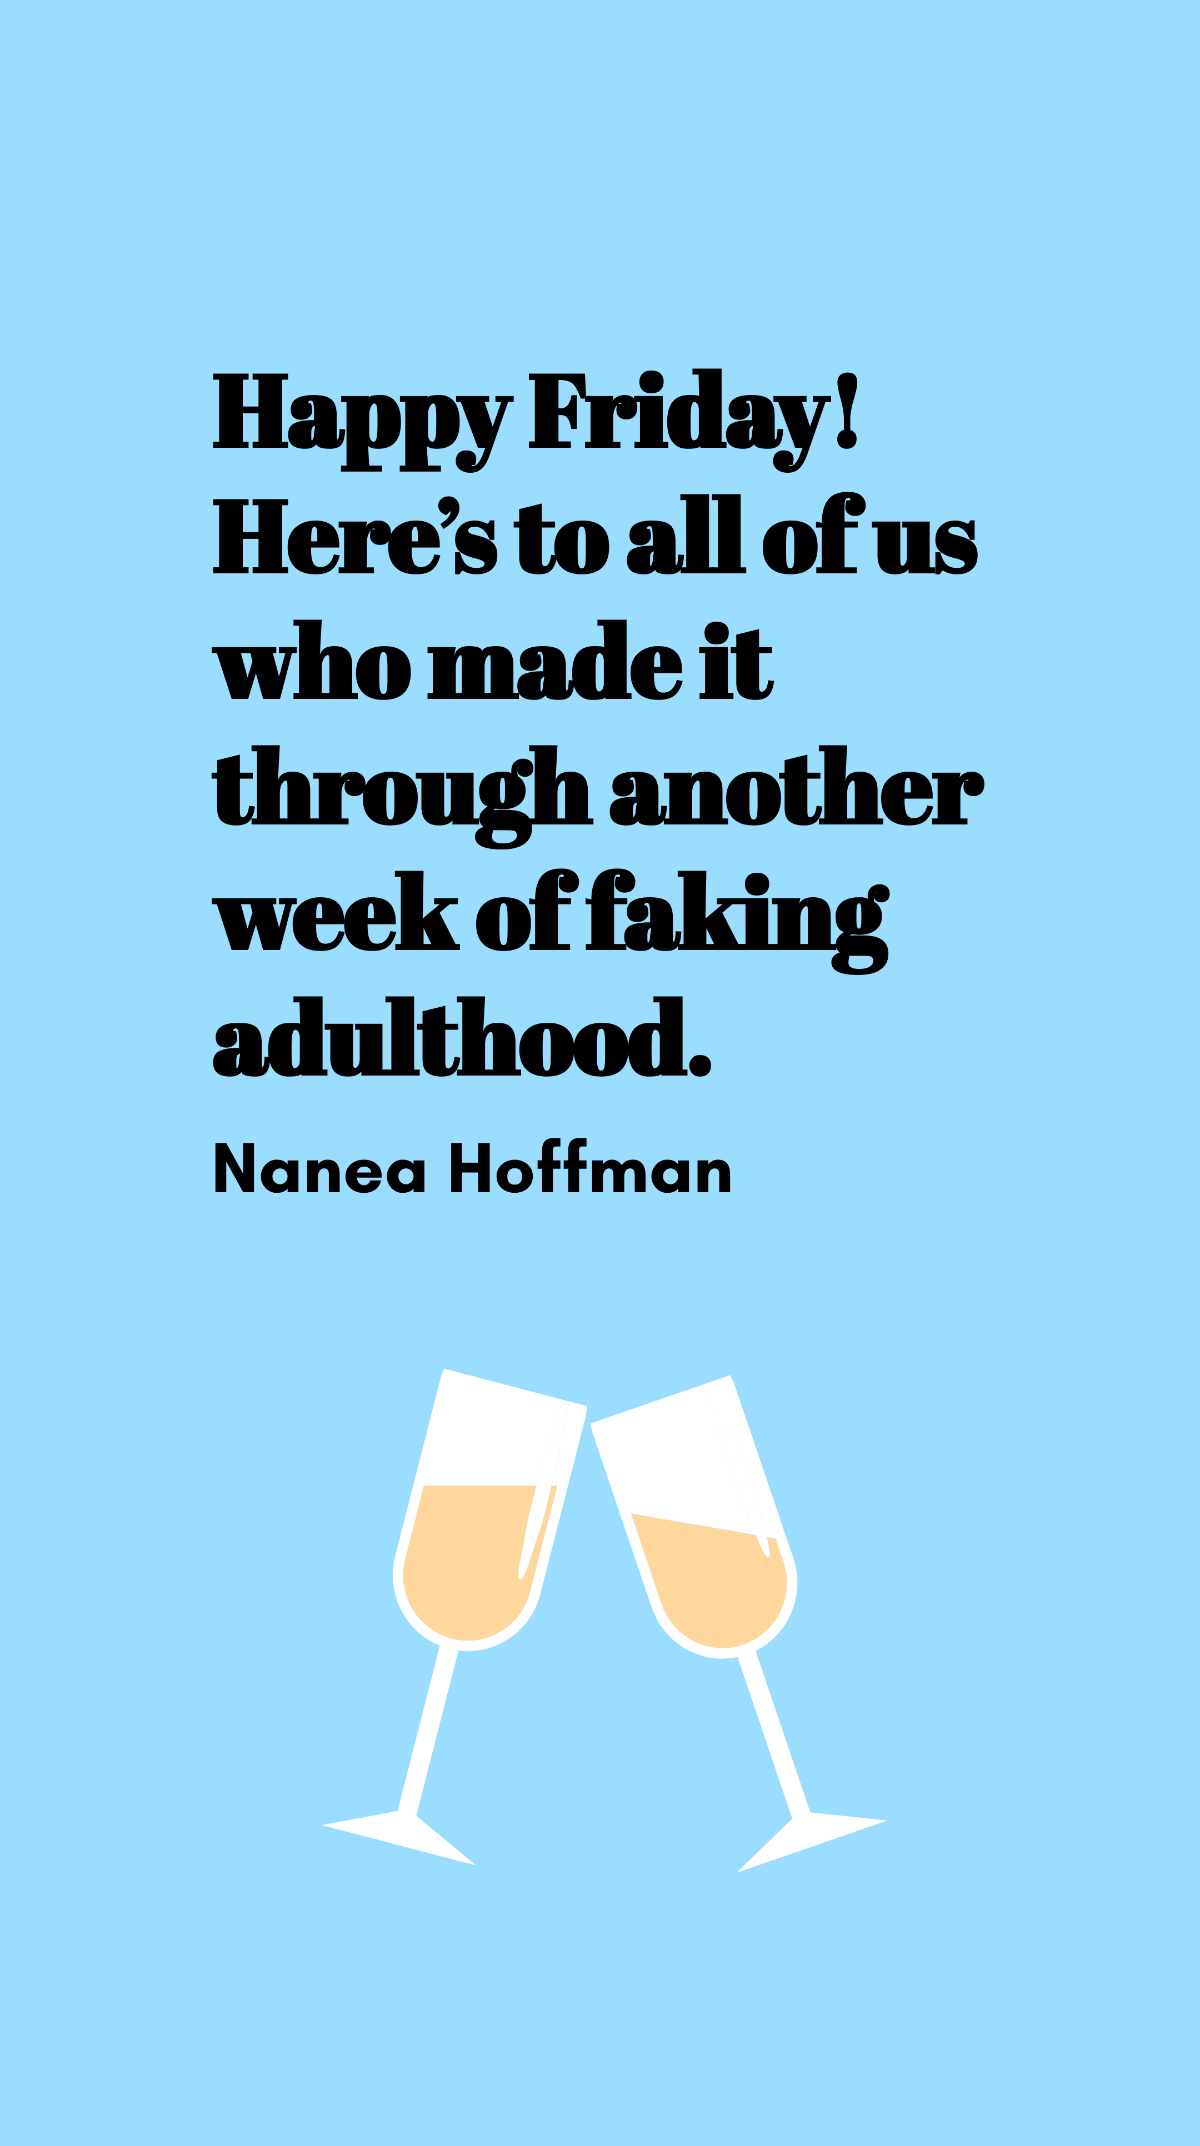 Nanea Hoffman - Happy Friday! Here’s to all of us who made it through another week of faking adulthood. Template